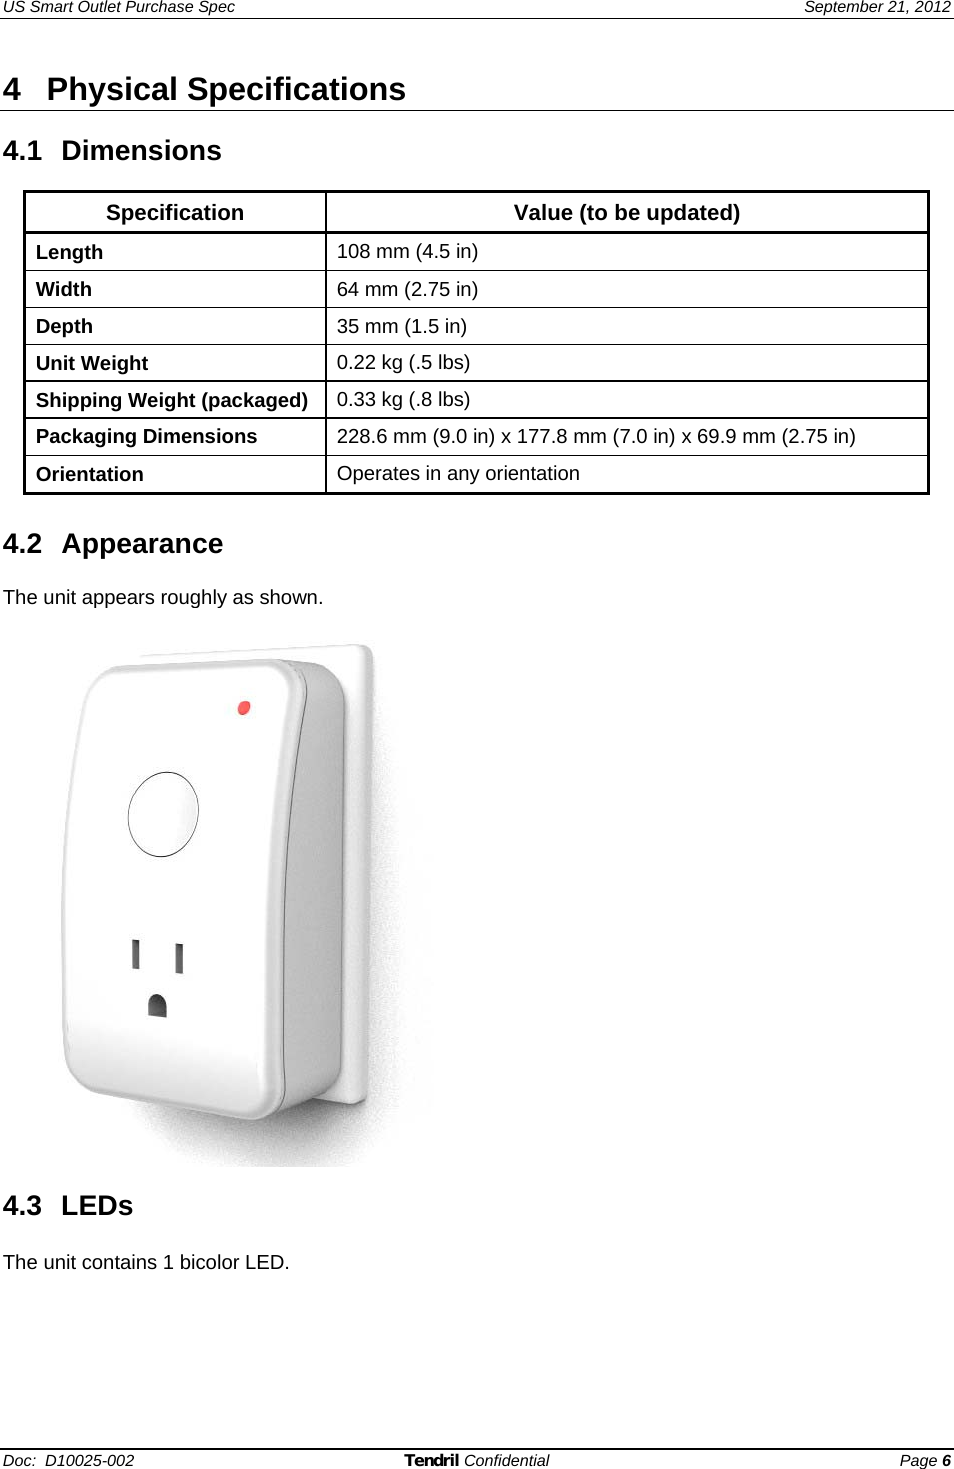 US Smart Outlet Purchase Spec   September 21, 2012 Doc:  D10025-002 Tendril Confidential Page 6 4 Physical Specifications  4.1  Dimensions       Specification  Value (to be updated) Length  108 mm (4.5 in)  Width  64 mm (2.75 in) Depth  35 mm (1.5 in) Unit Weight  0.22 kg (.5 lbs) Shipping Weight (packaged)  0.33 kg (.8 lbs) Packaging Dimensions  228.6 mm (9.0 in) x 177.8 mm (7.0 in) x 69.9 mm (2.75 in)  Orientation  Operates in any orientation  4.2 Appearance  The unit appears roughly as shown.     4.3 LEDs The unit contains 1 bicolor LED. 